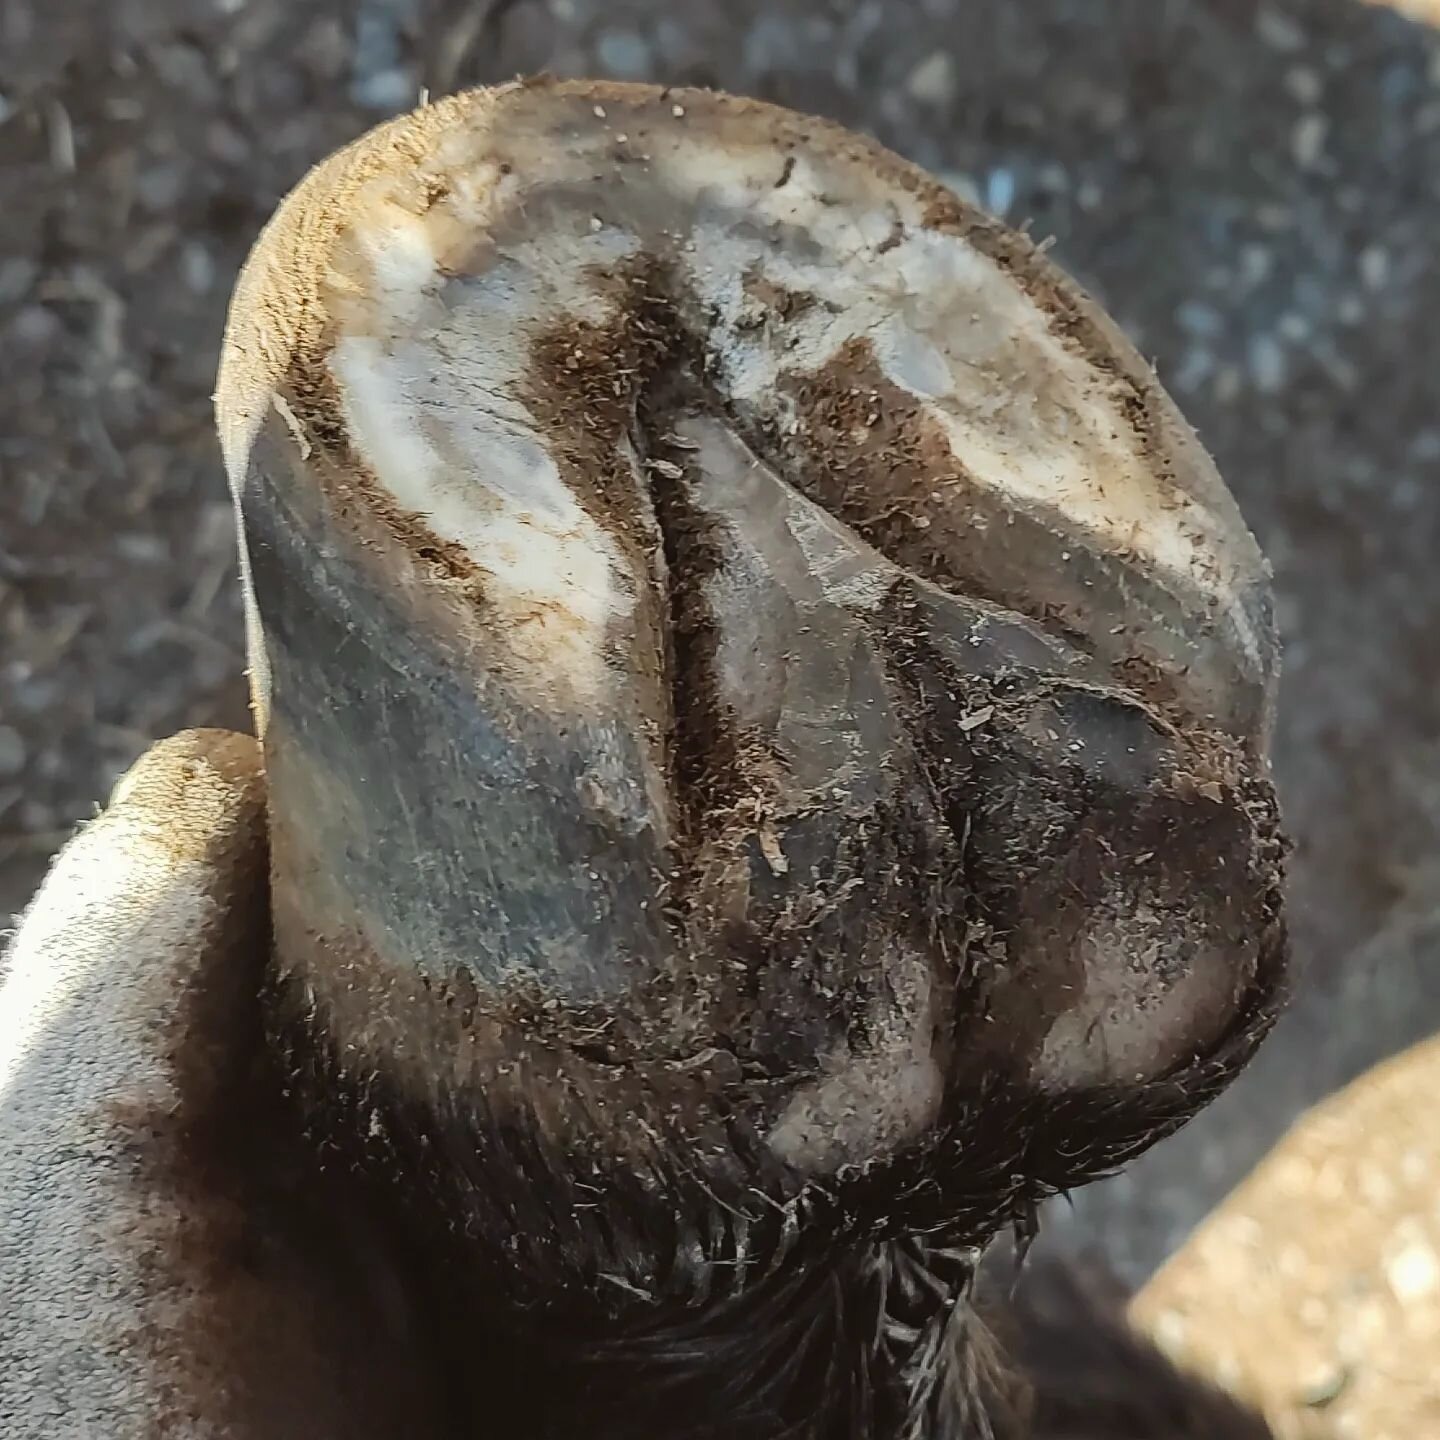 Mule hoof of the day! We have been getting a lot of snow in New Mexico after a pretty dry autumn, and our heavy clay soil really creates quite a mess when it melts. A lot of equines I have seen in the past couple weeks have developed thrush (often vi